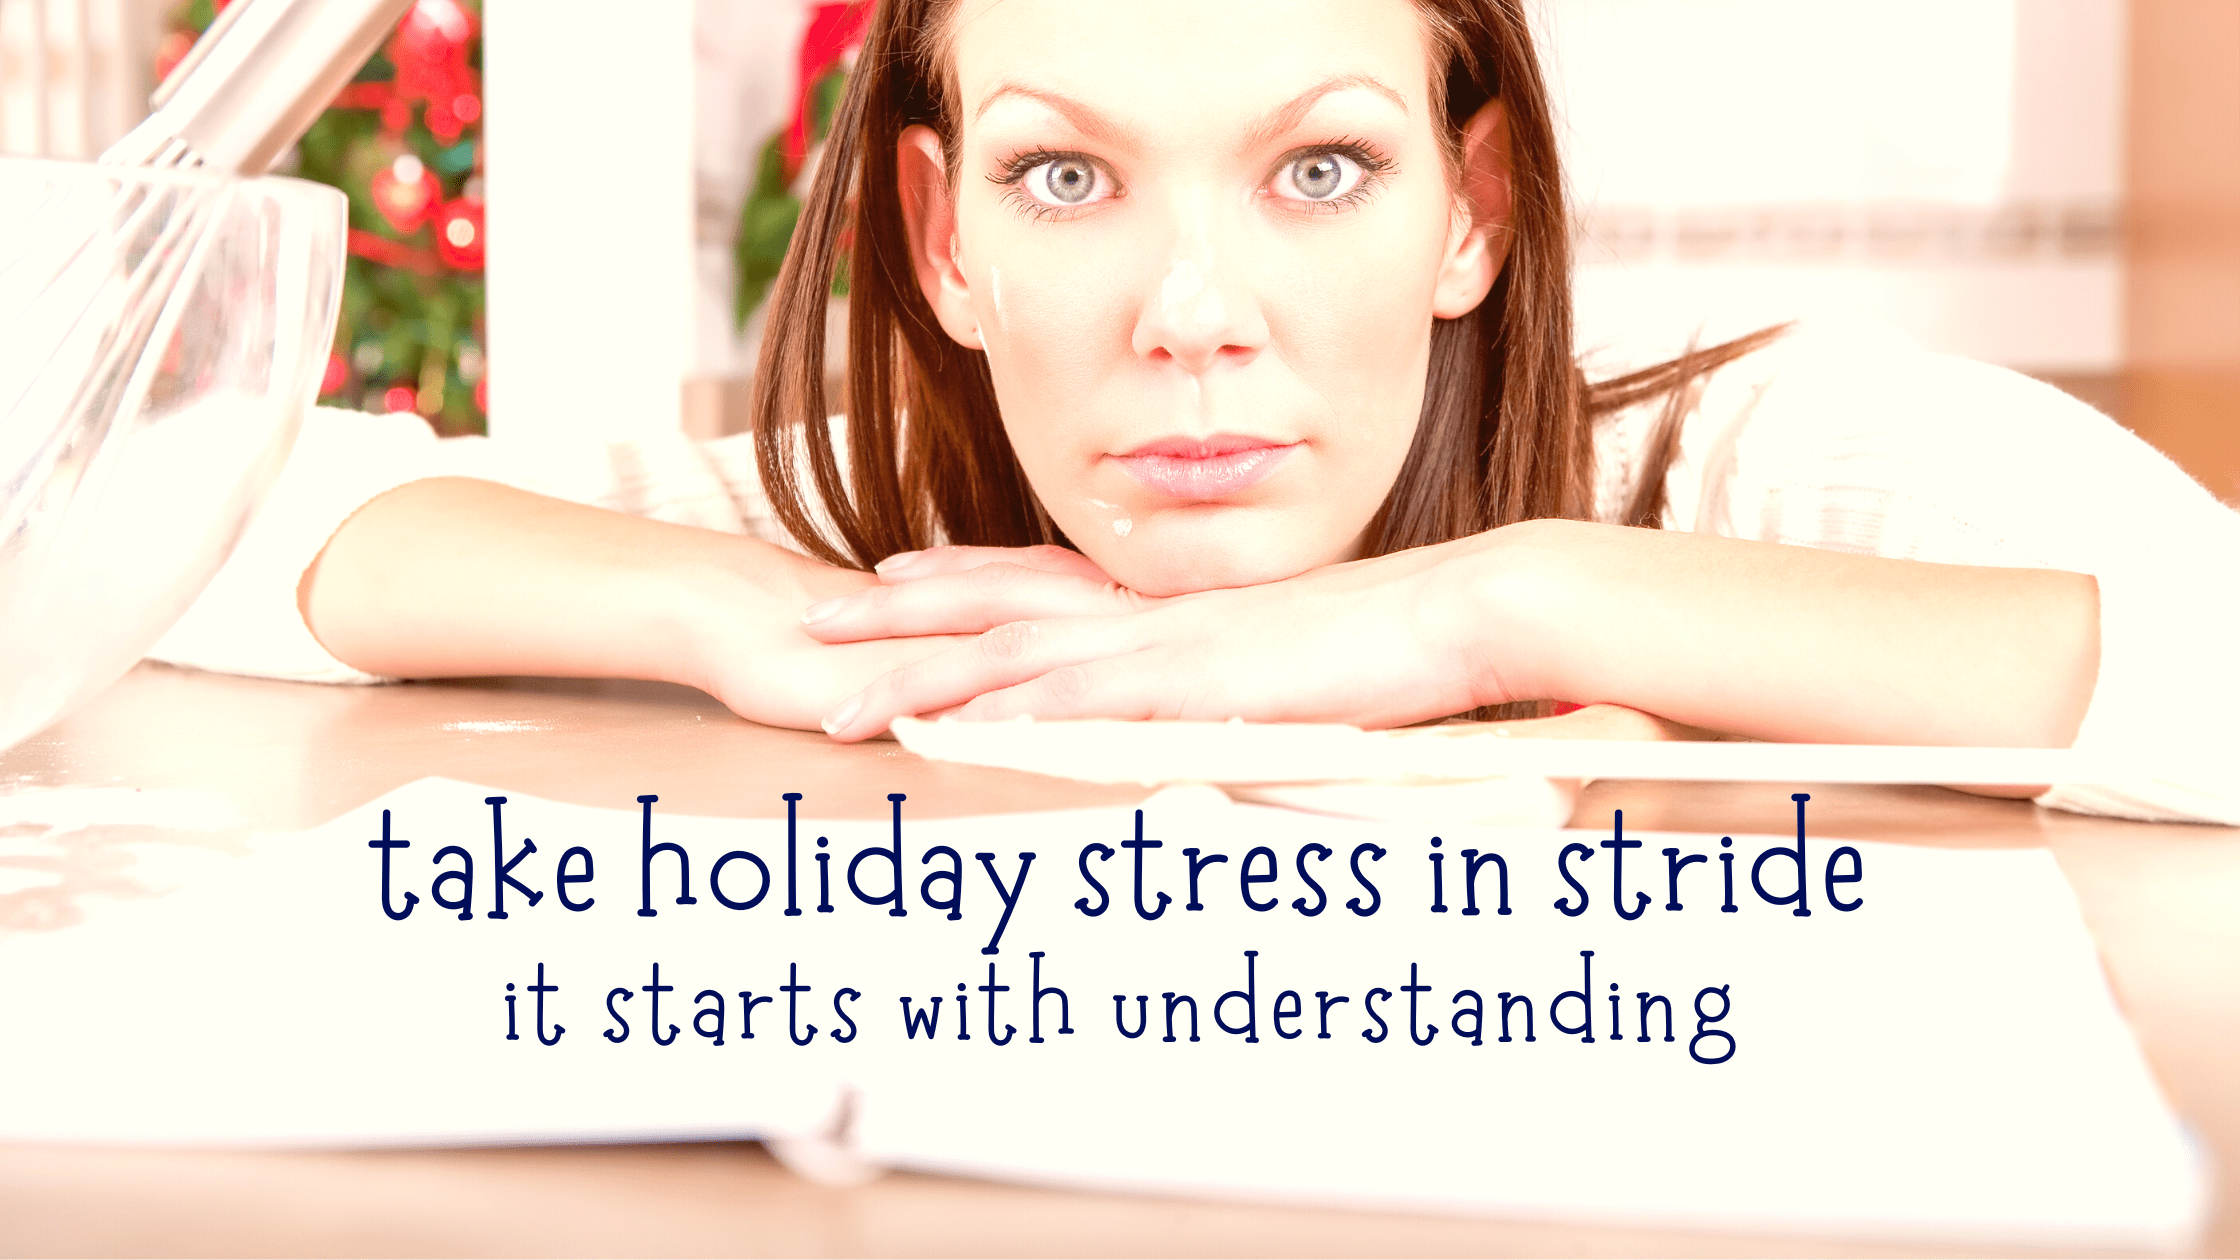 holiday stress, stress management, beat holiday stress, why are holidays stressful,